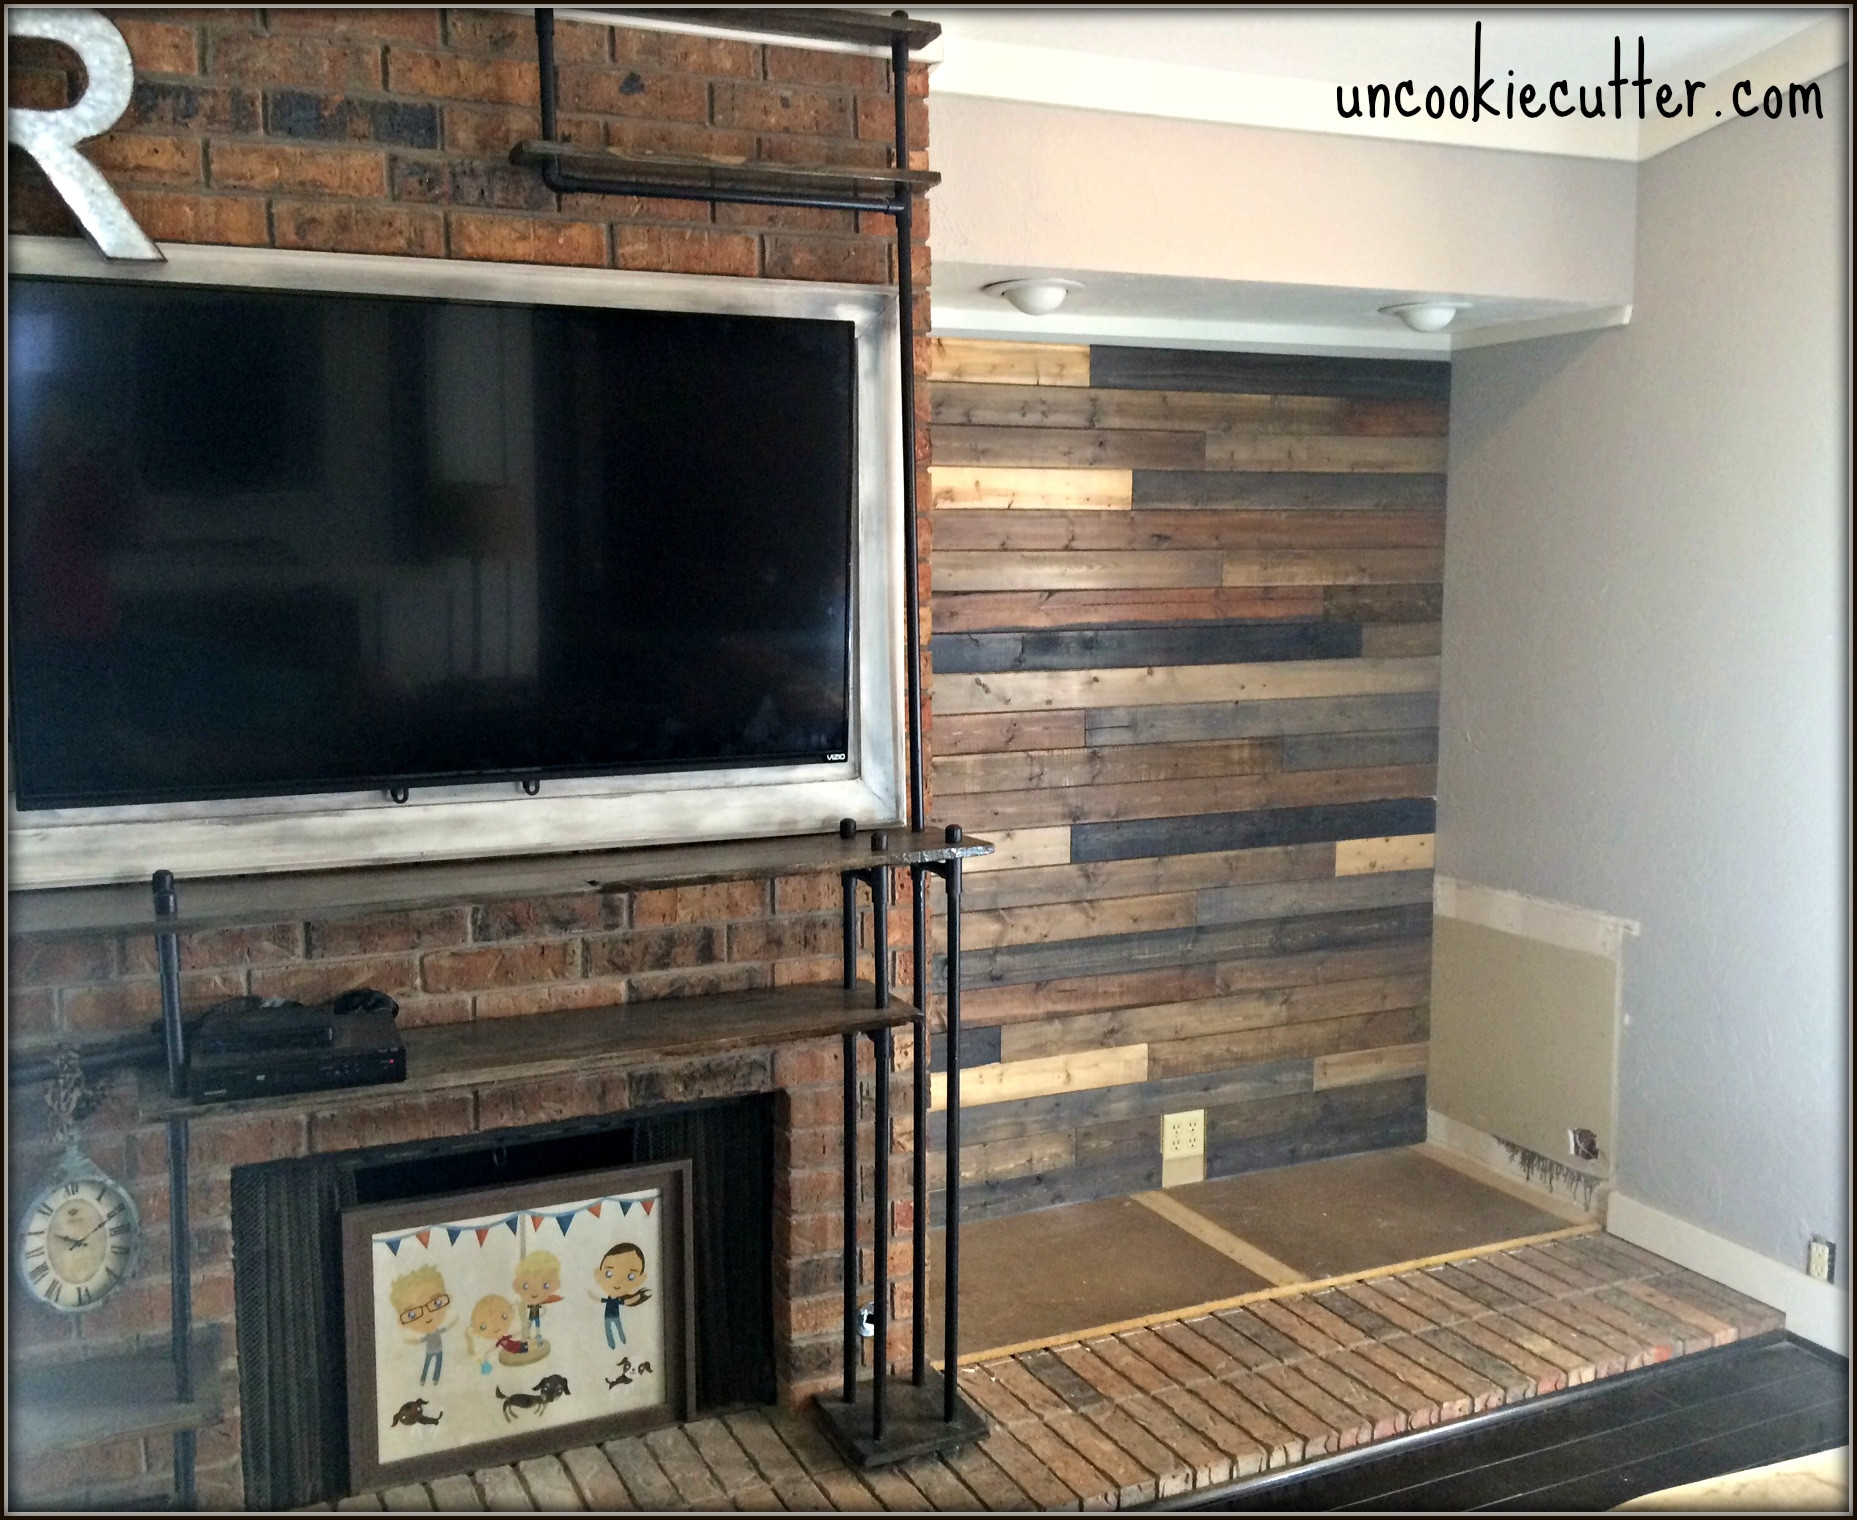 Wood Wall Paneling DIY
 Mixed Wood Wall Easy & Cheap DIY Uncookie Cutter